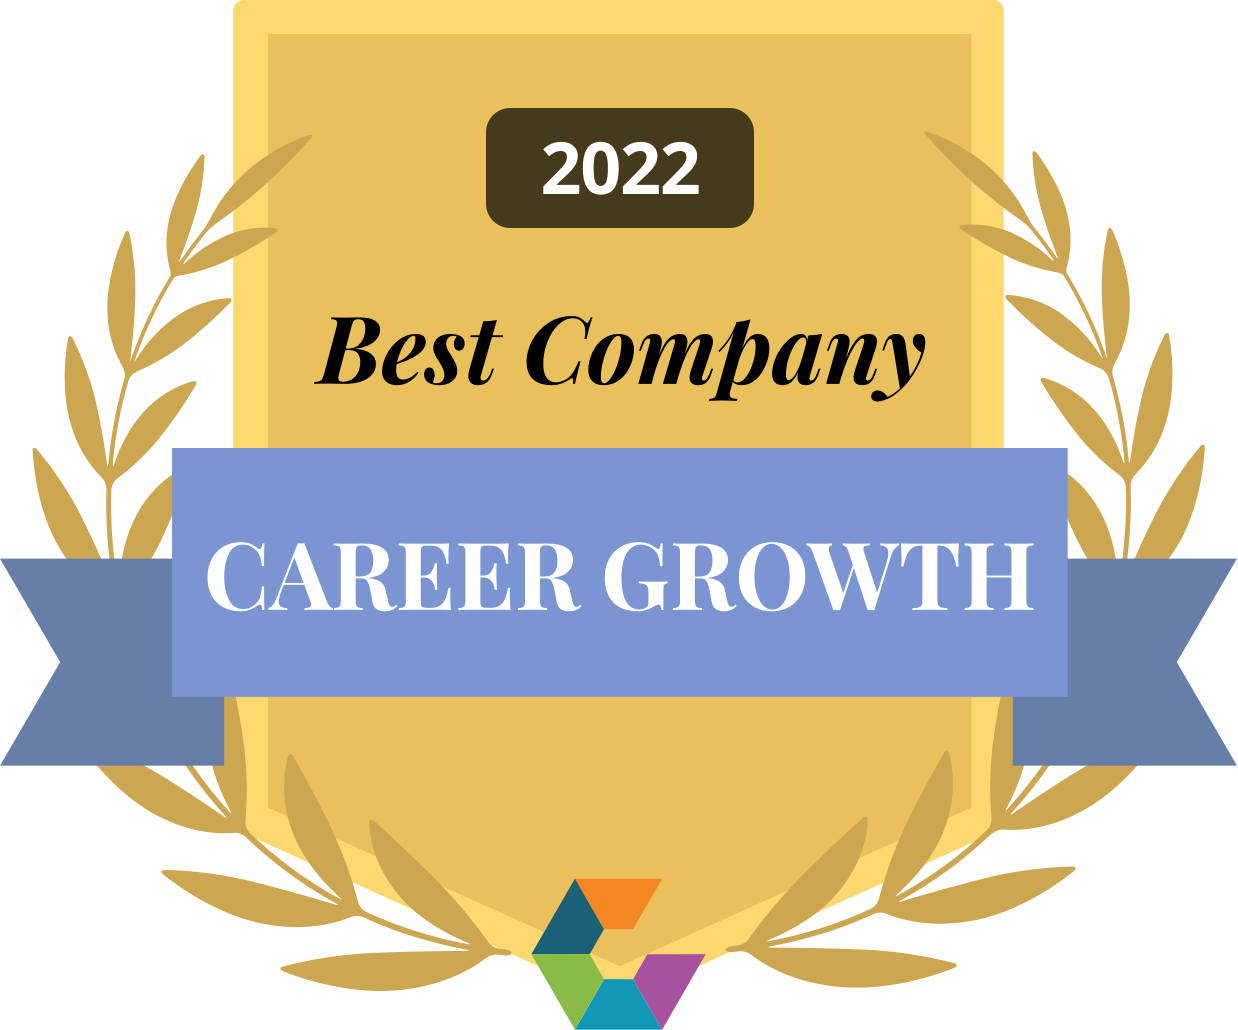 2022 Best Company for Career Growth